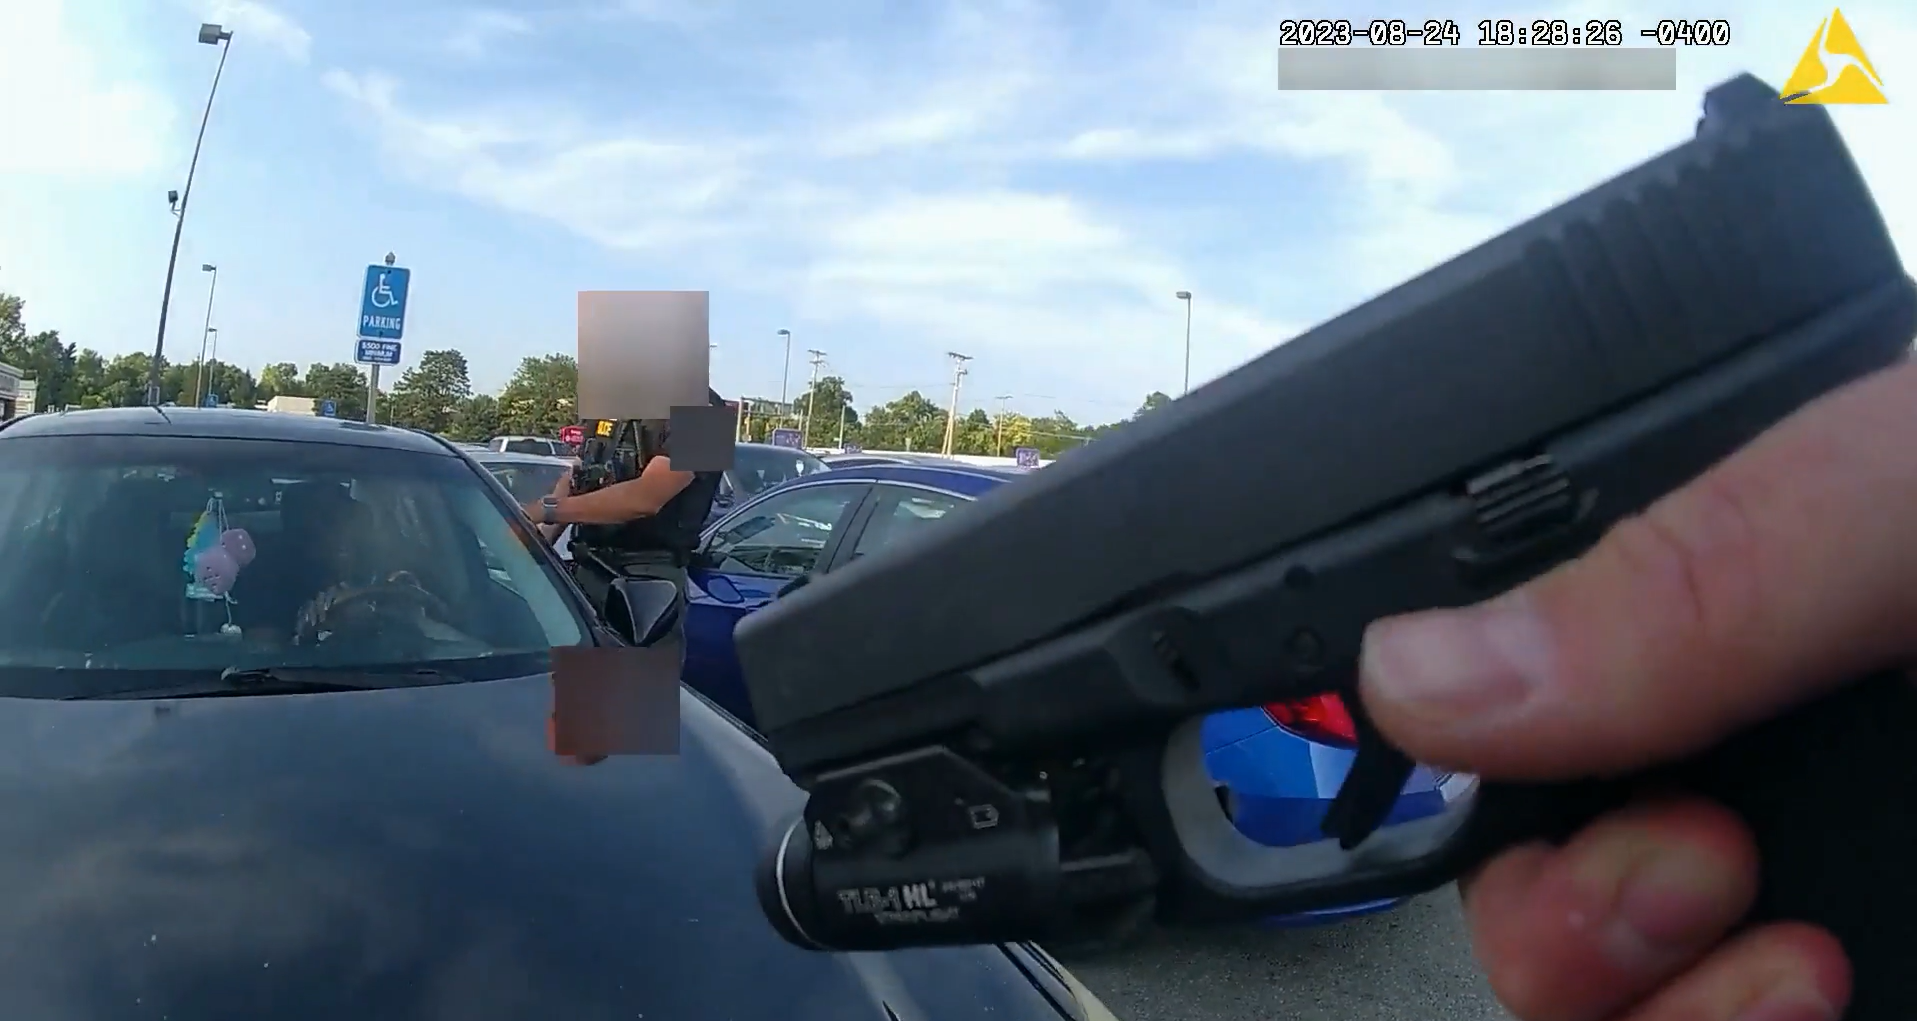 [WATCH] Video Released Of Officer Fatally Shooting Pregnant Black Woman